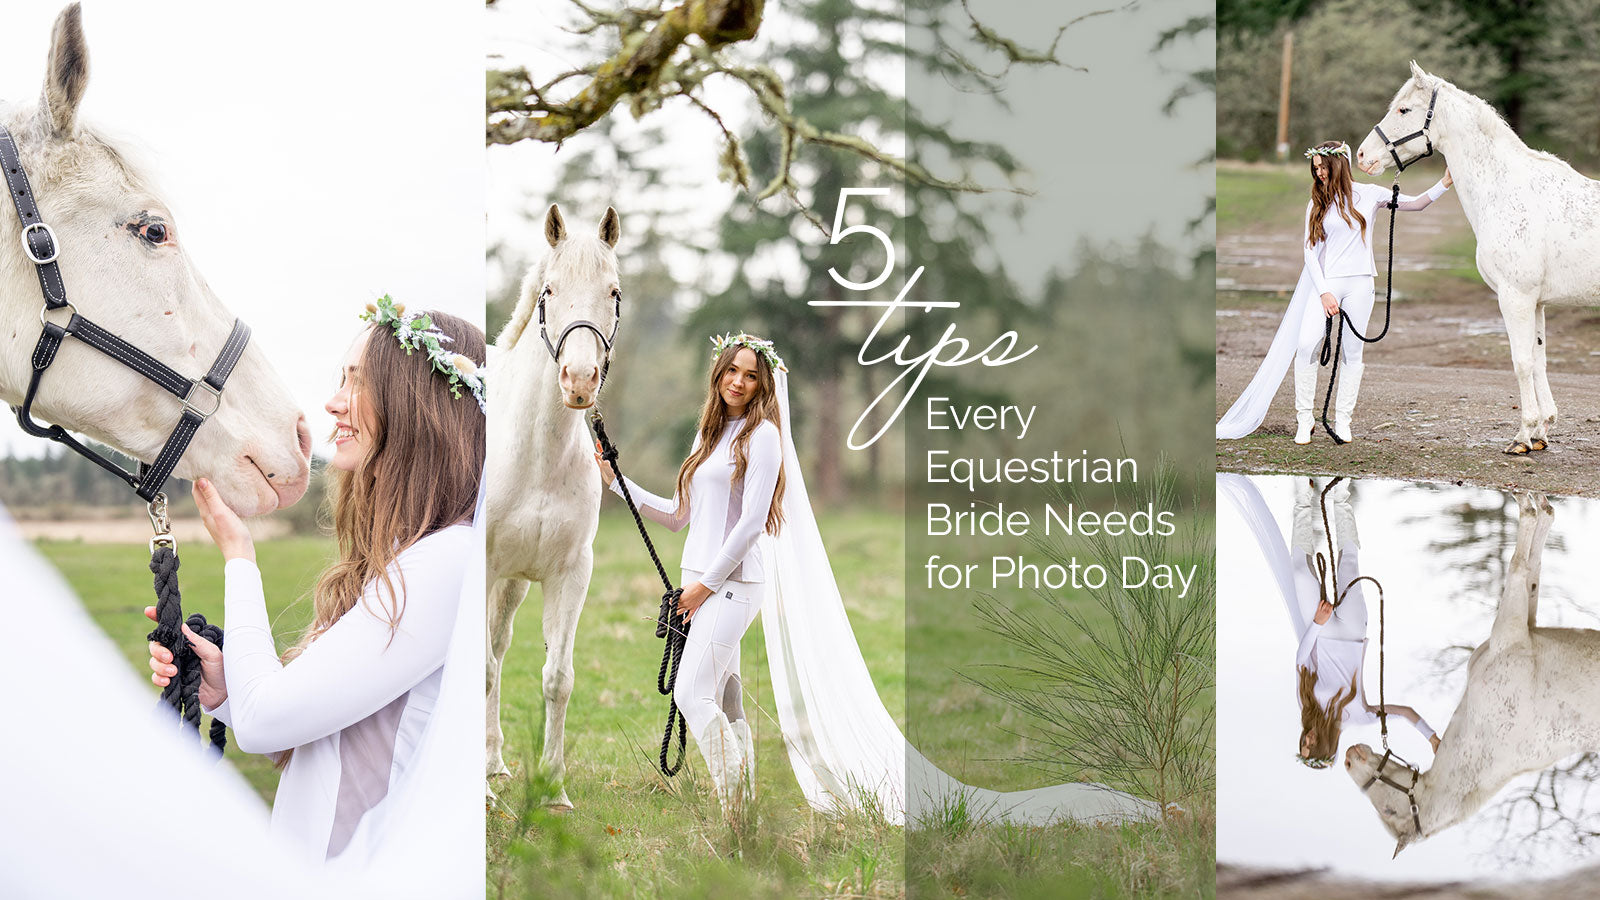 5 Items Every Equestrian Bride Needs for Photo Day